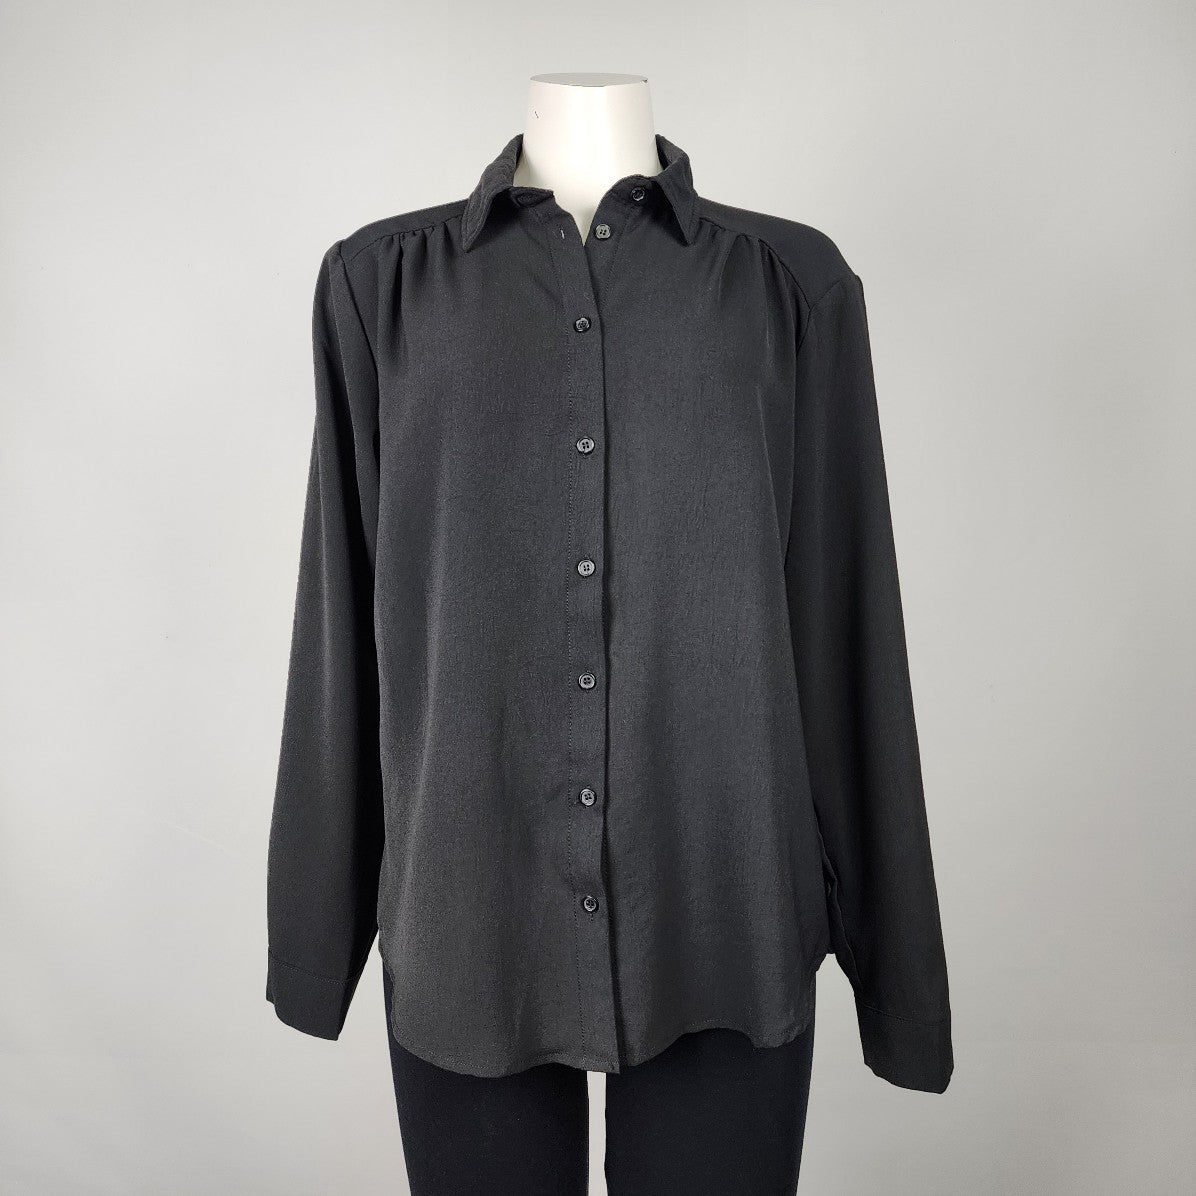 Have Black Pleated Button Up Long Sleeves Top Size L